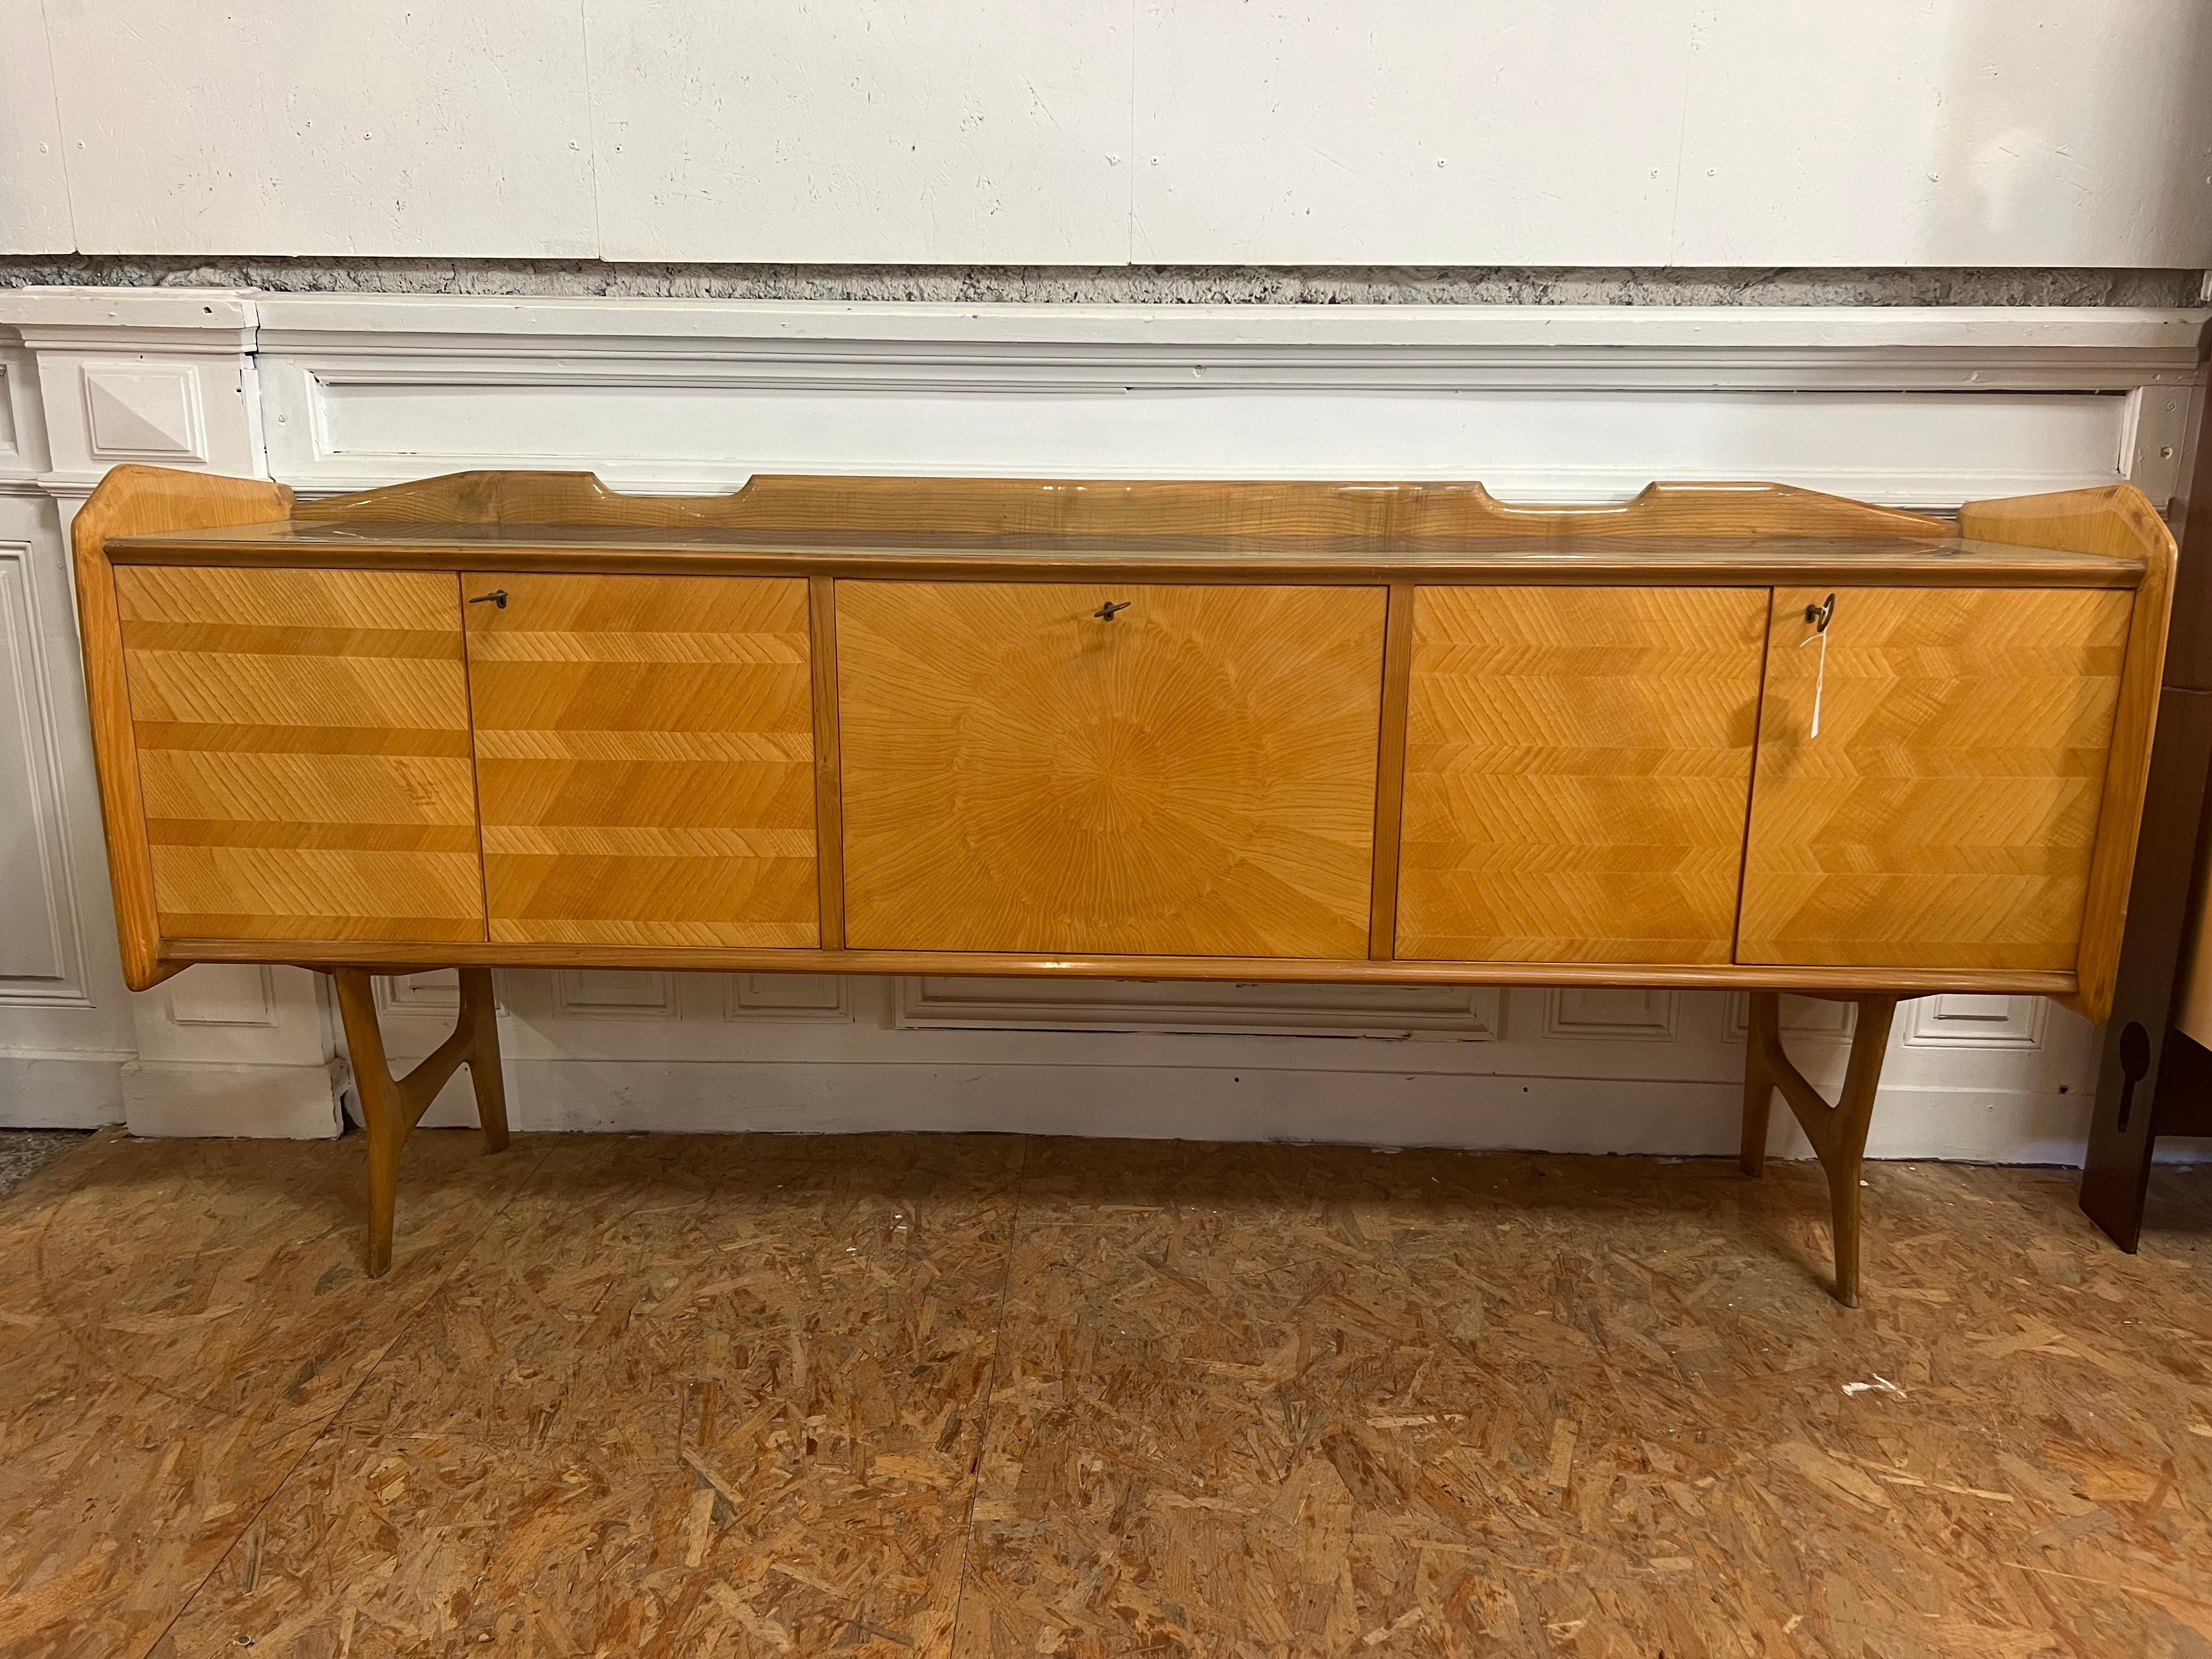 4-door sideboard and central door opening onto an Ico Parisi bar from the 1950s
the splashback is in light wood, honey color with very large marquetry work on the doors, and especially this sun on the central door
the top is in bluish and white